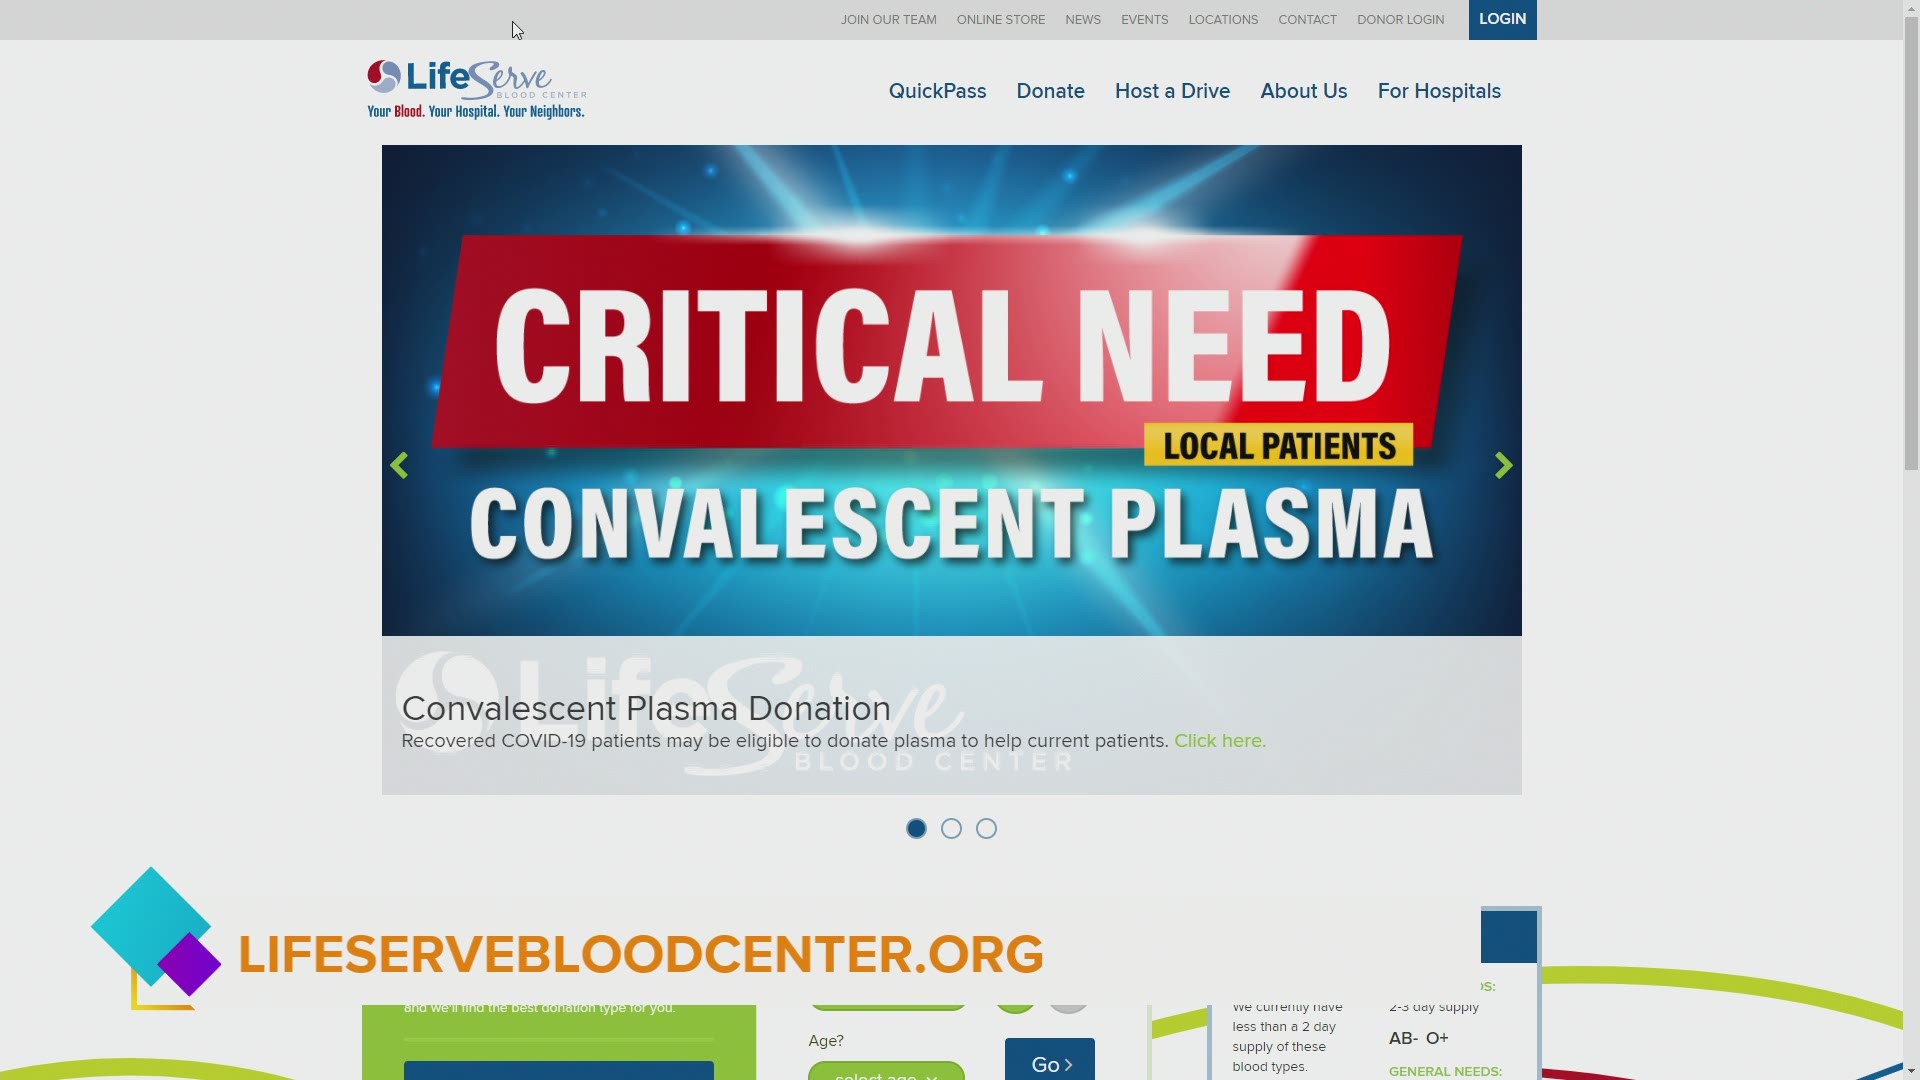 The need for convalescent plasma donors is higher now more than ever.